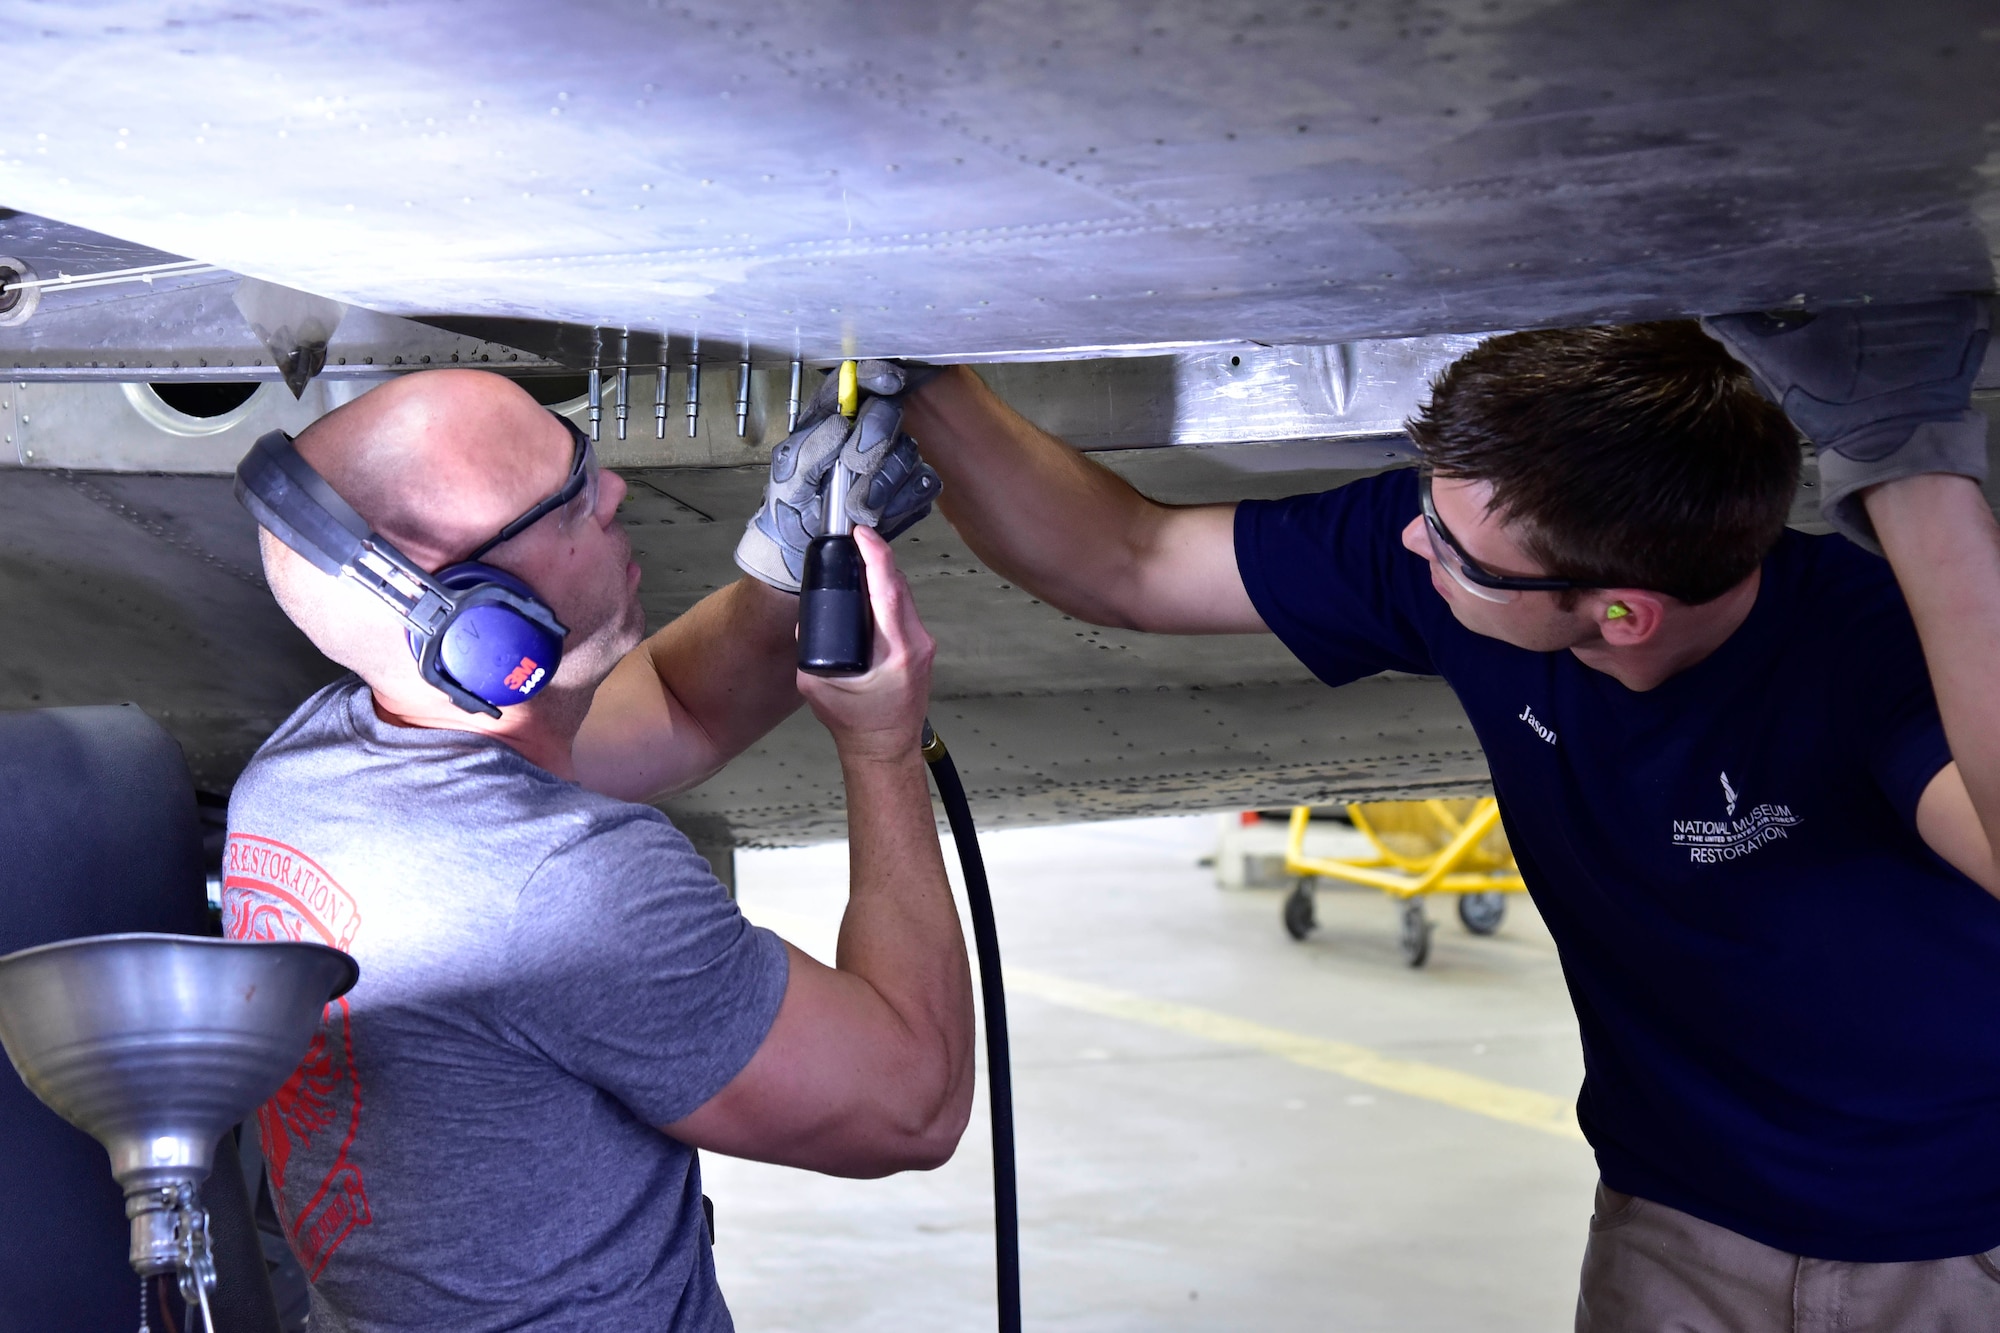 DAYTON, Ohio (06/2017) -- (From left to right) Restoration Specialists Chase Meredith and Jason Davis work on the B-17F "Memphis Belle"™ in the restoration hangar at the National Museum of the U.S. Air Force. The exhibit opening for this aircraft is planned for May 17, 2018.(U.S. Air Force photo by Ken LaRock)